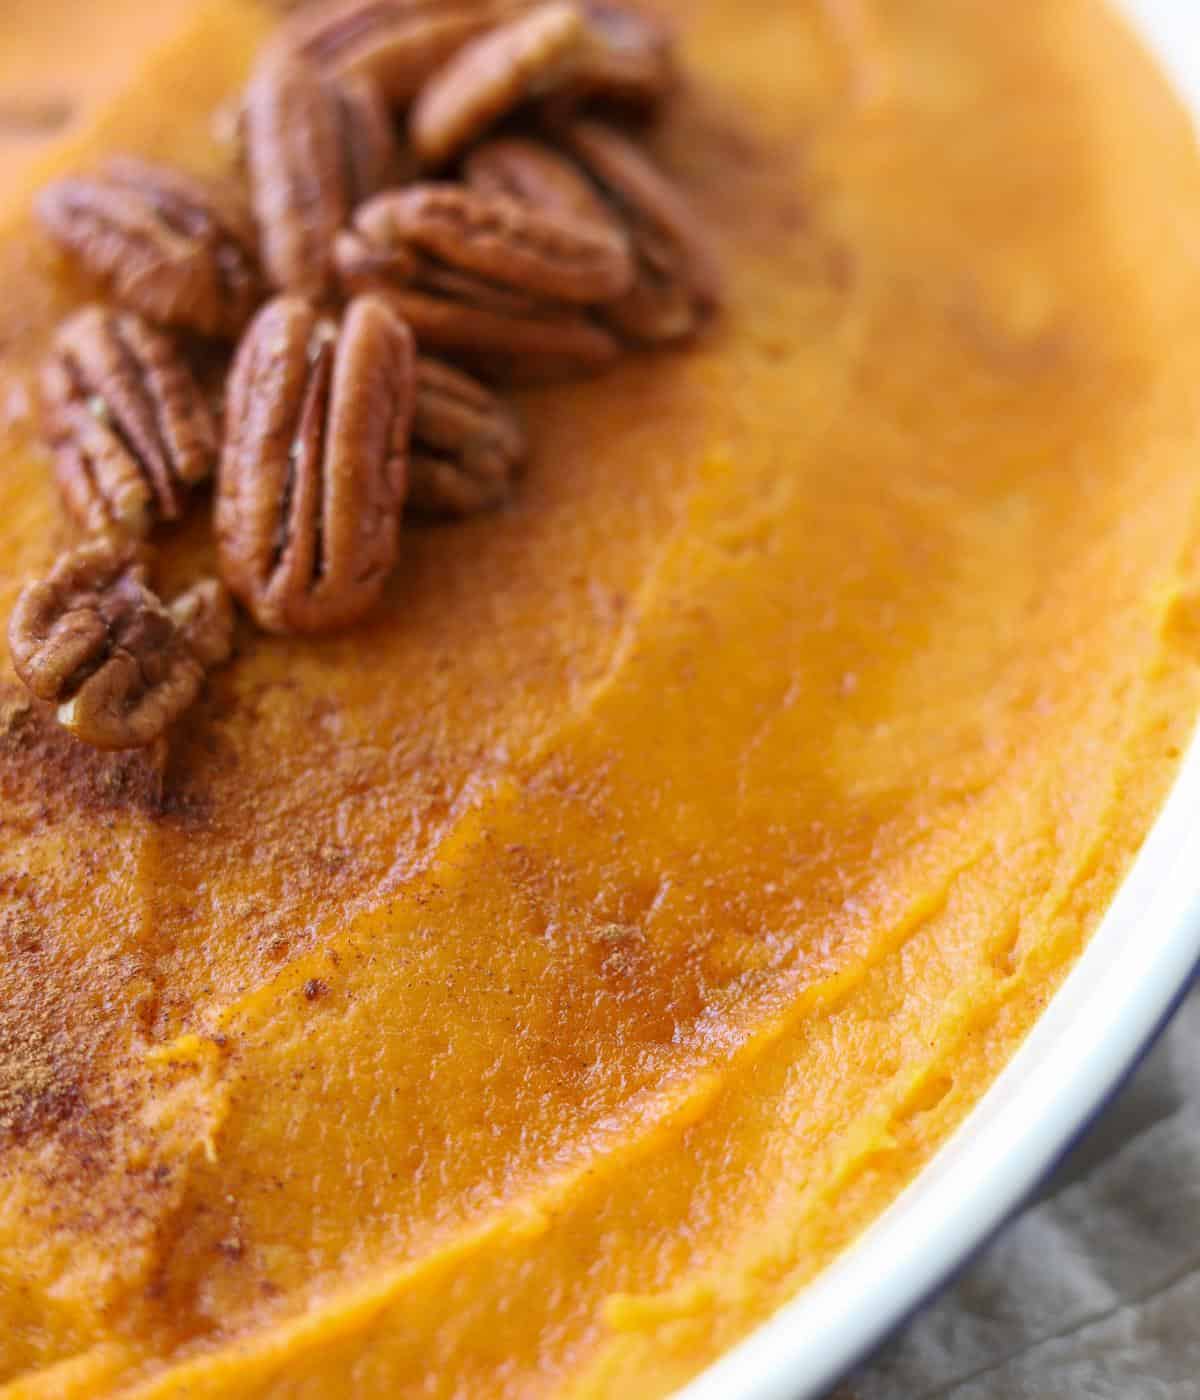 close up view to show smooth texture of whipped sweet potatoes in casserole dish